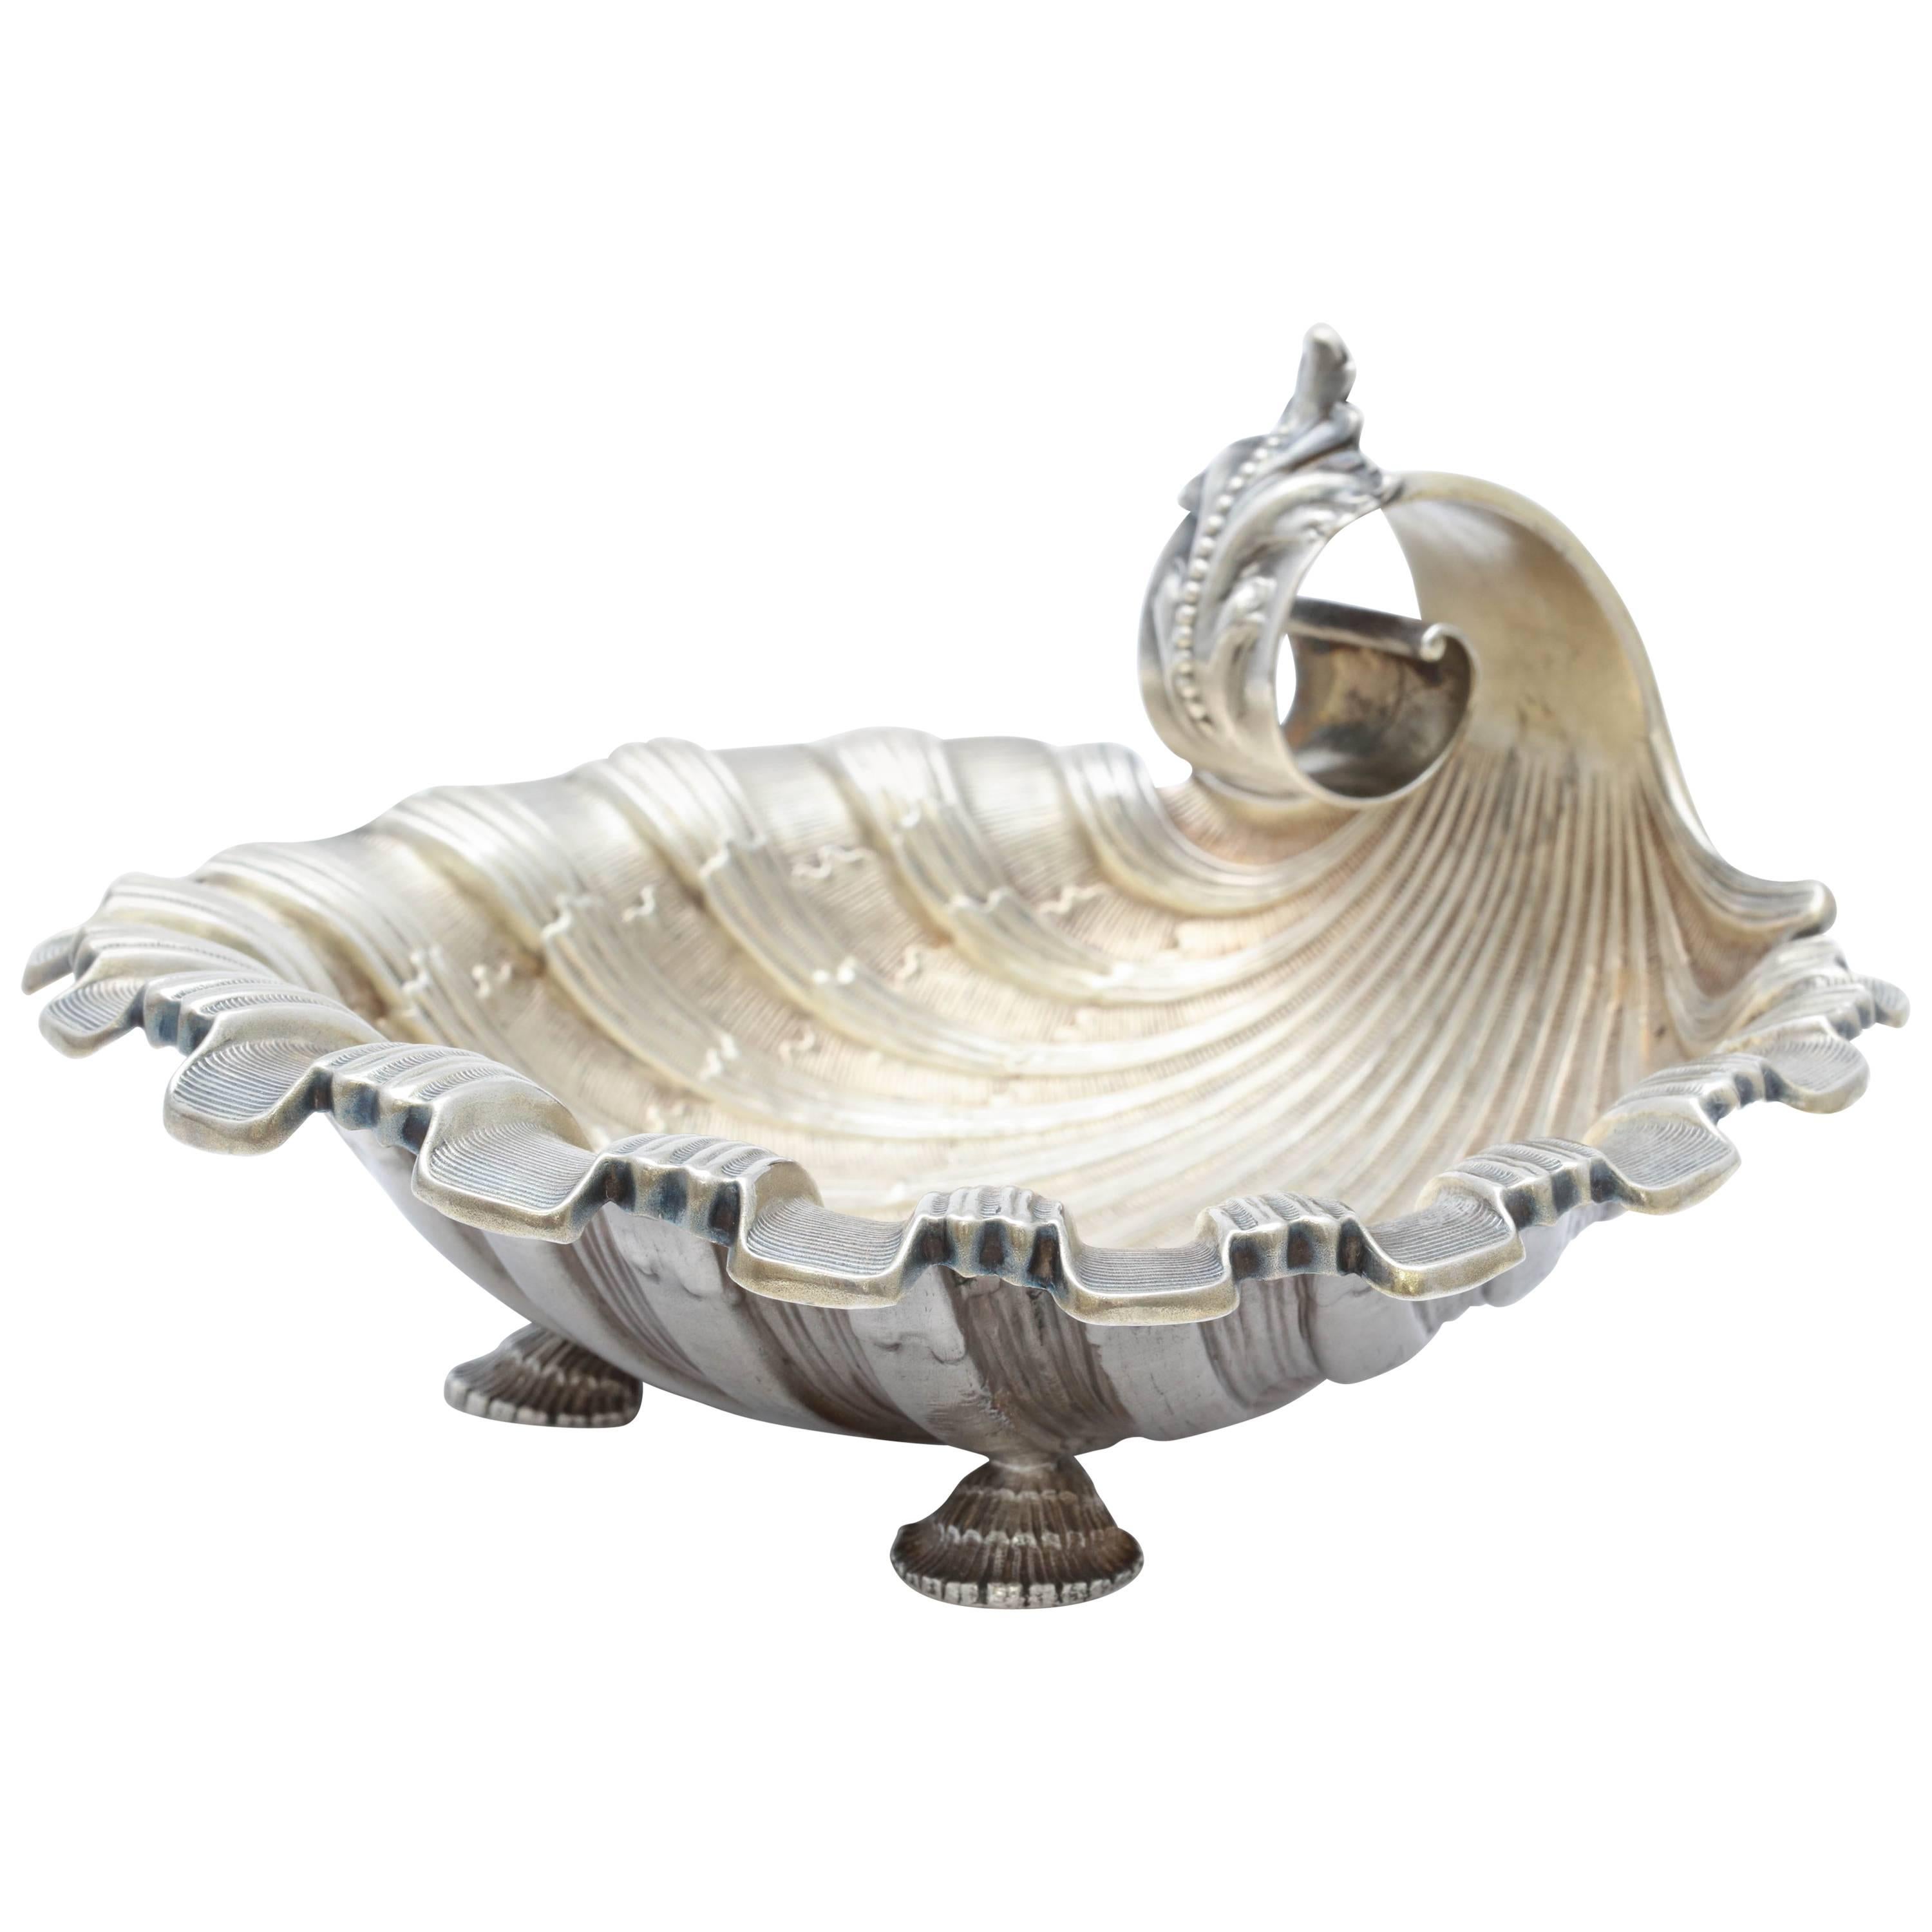  Art Nouveau Sterling Silver Gilt Footed Shell Form Dish